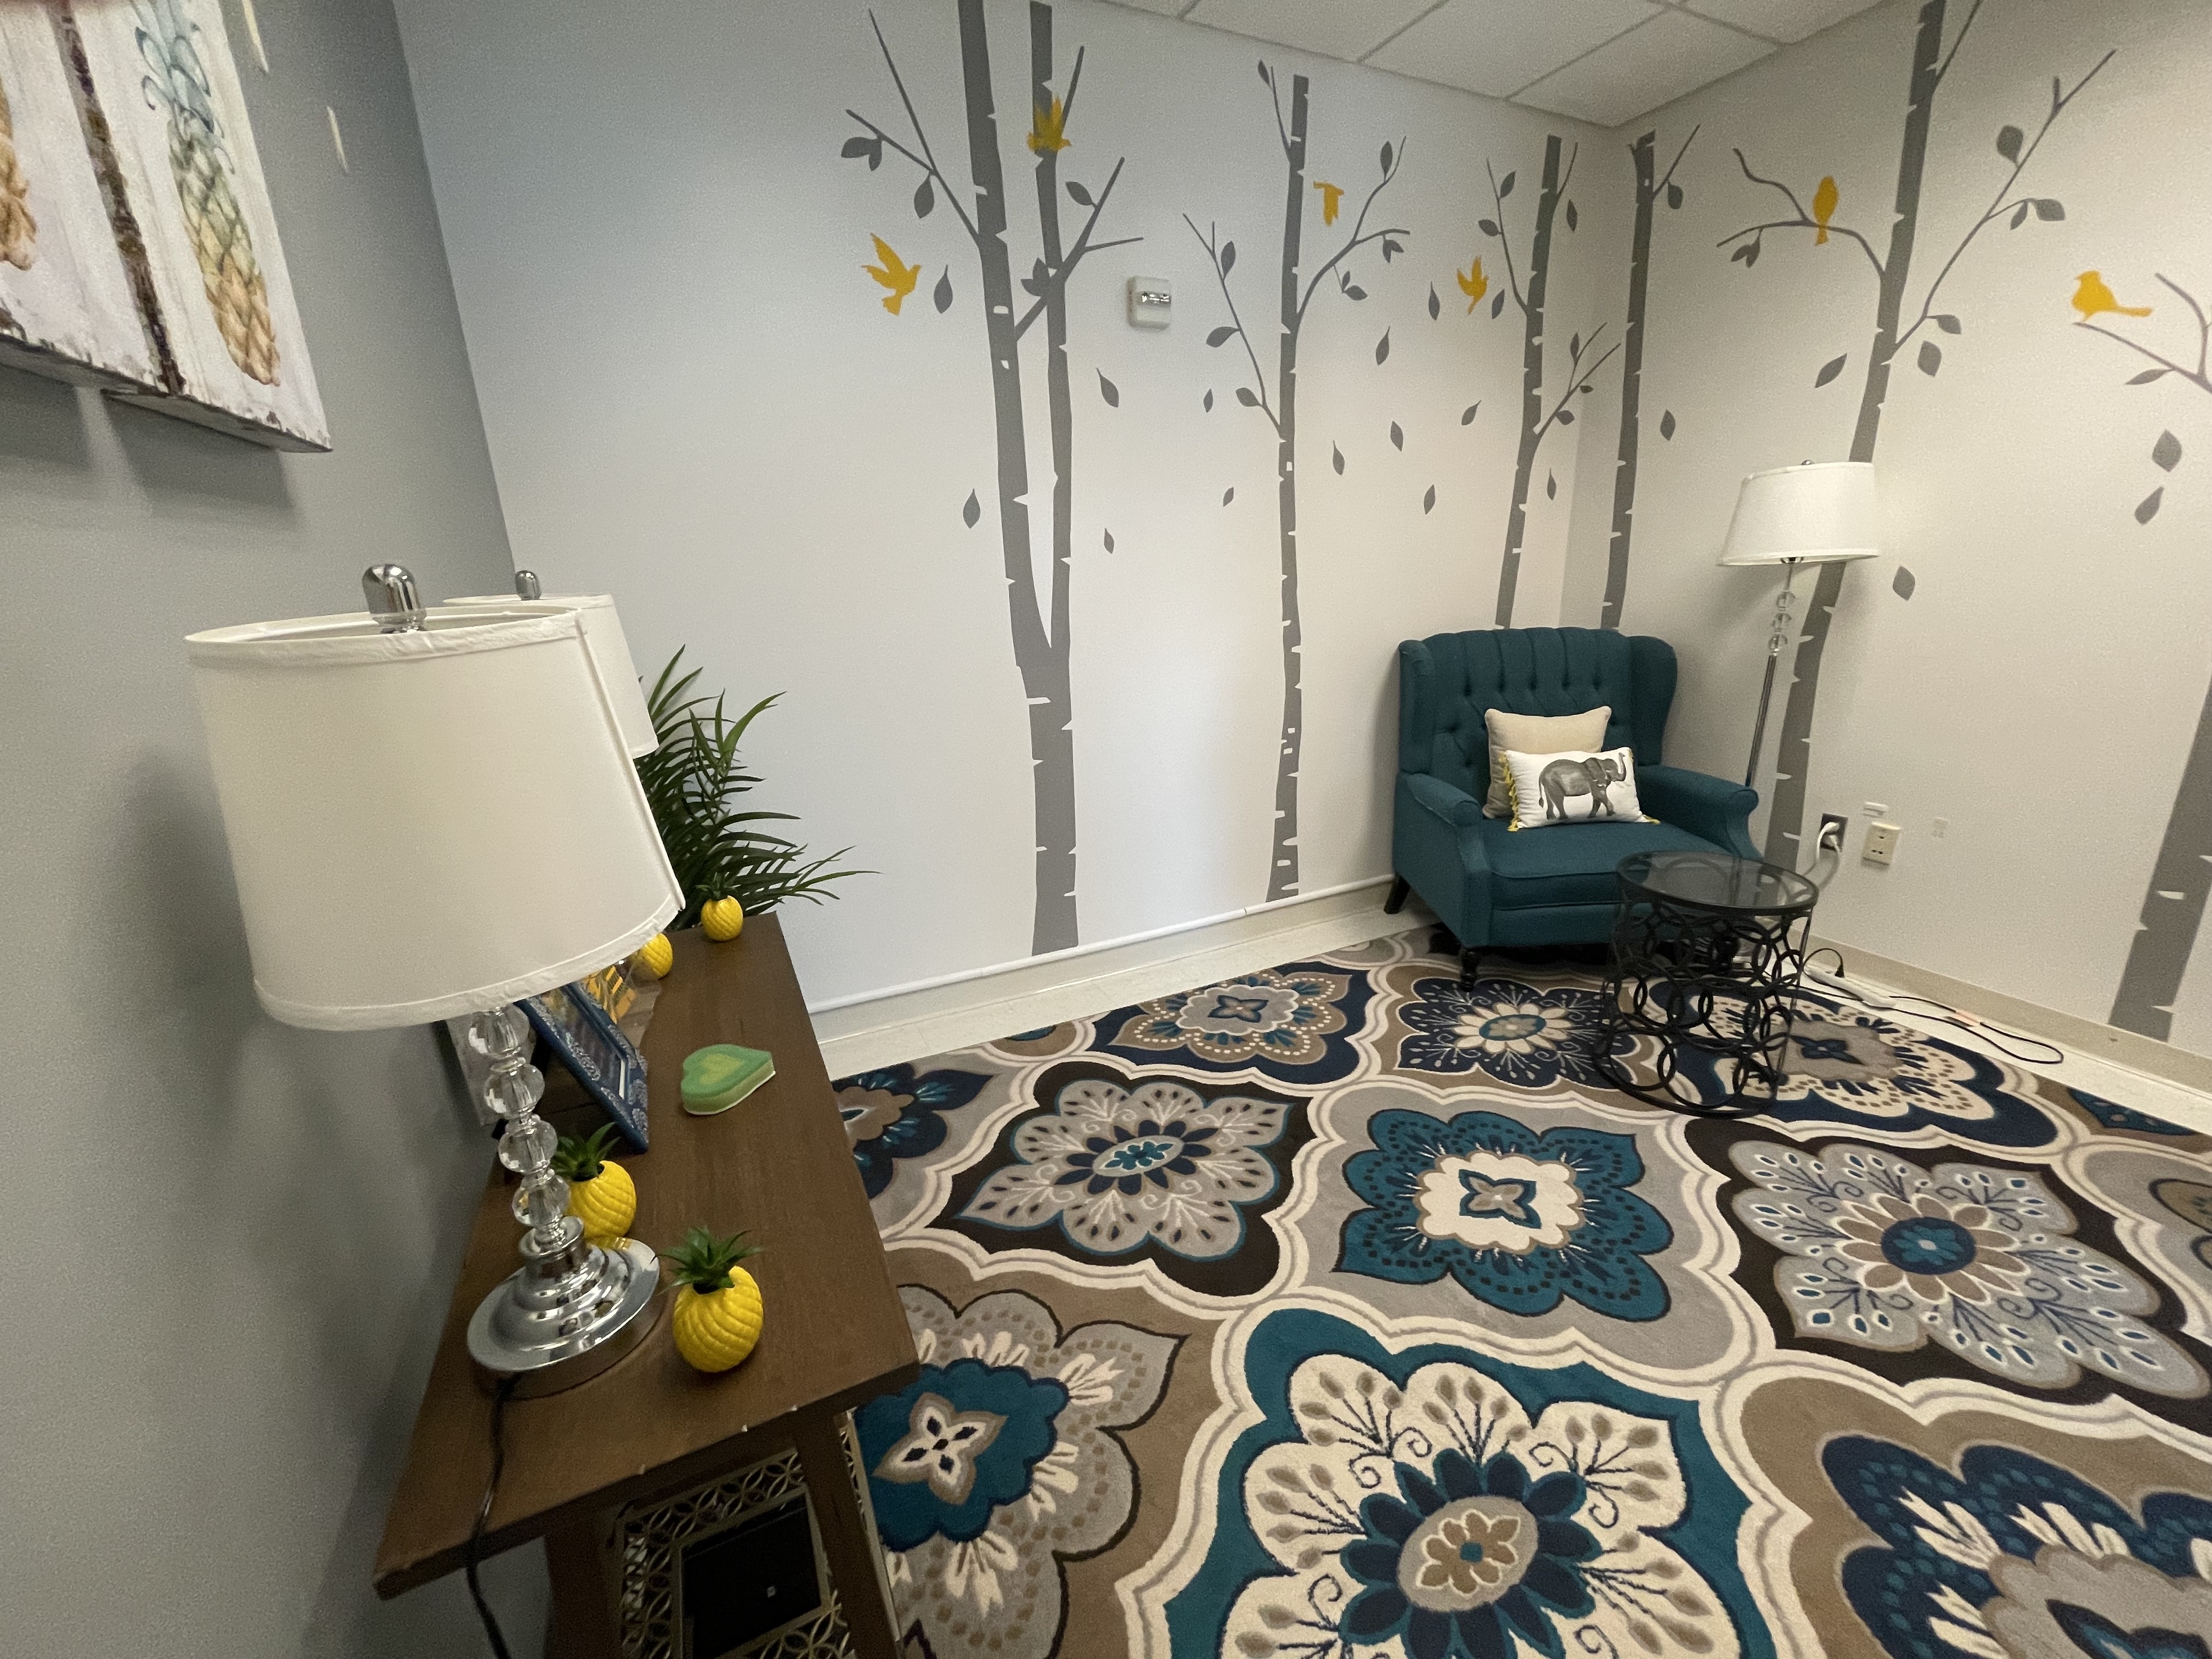 room with tree and bird murals on the wall, a colorful carpet, armchair, side table, and lamps